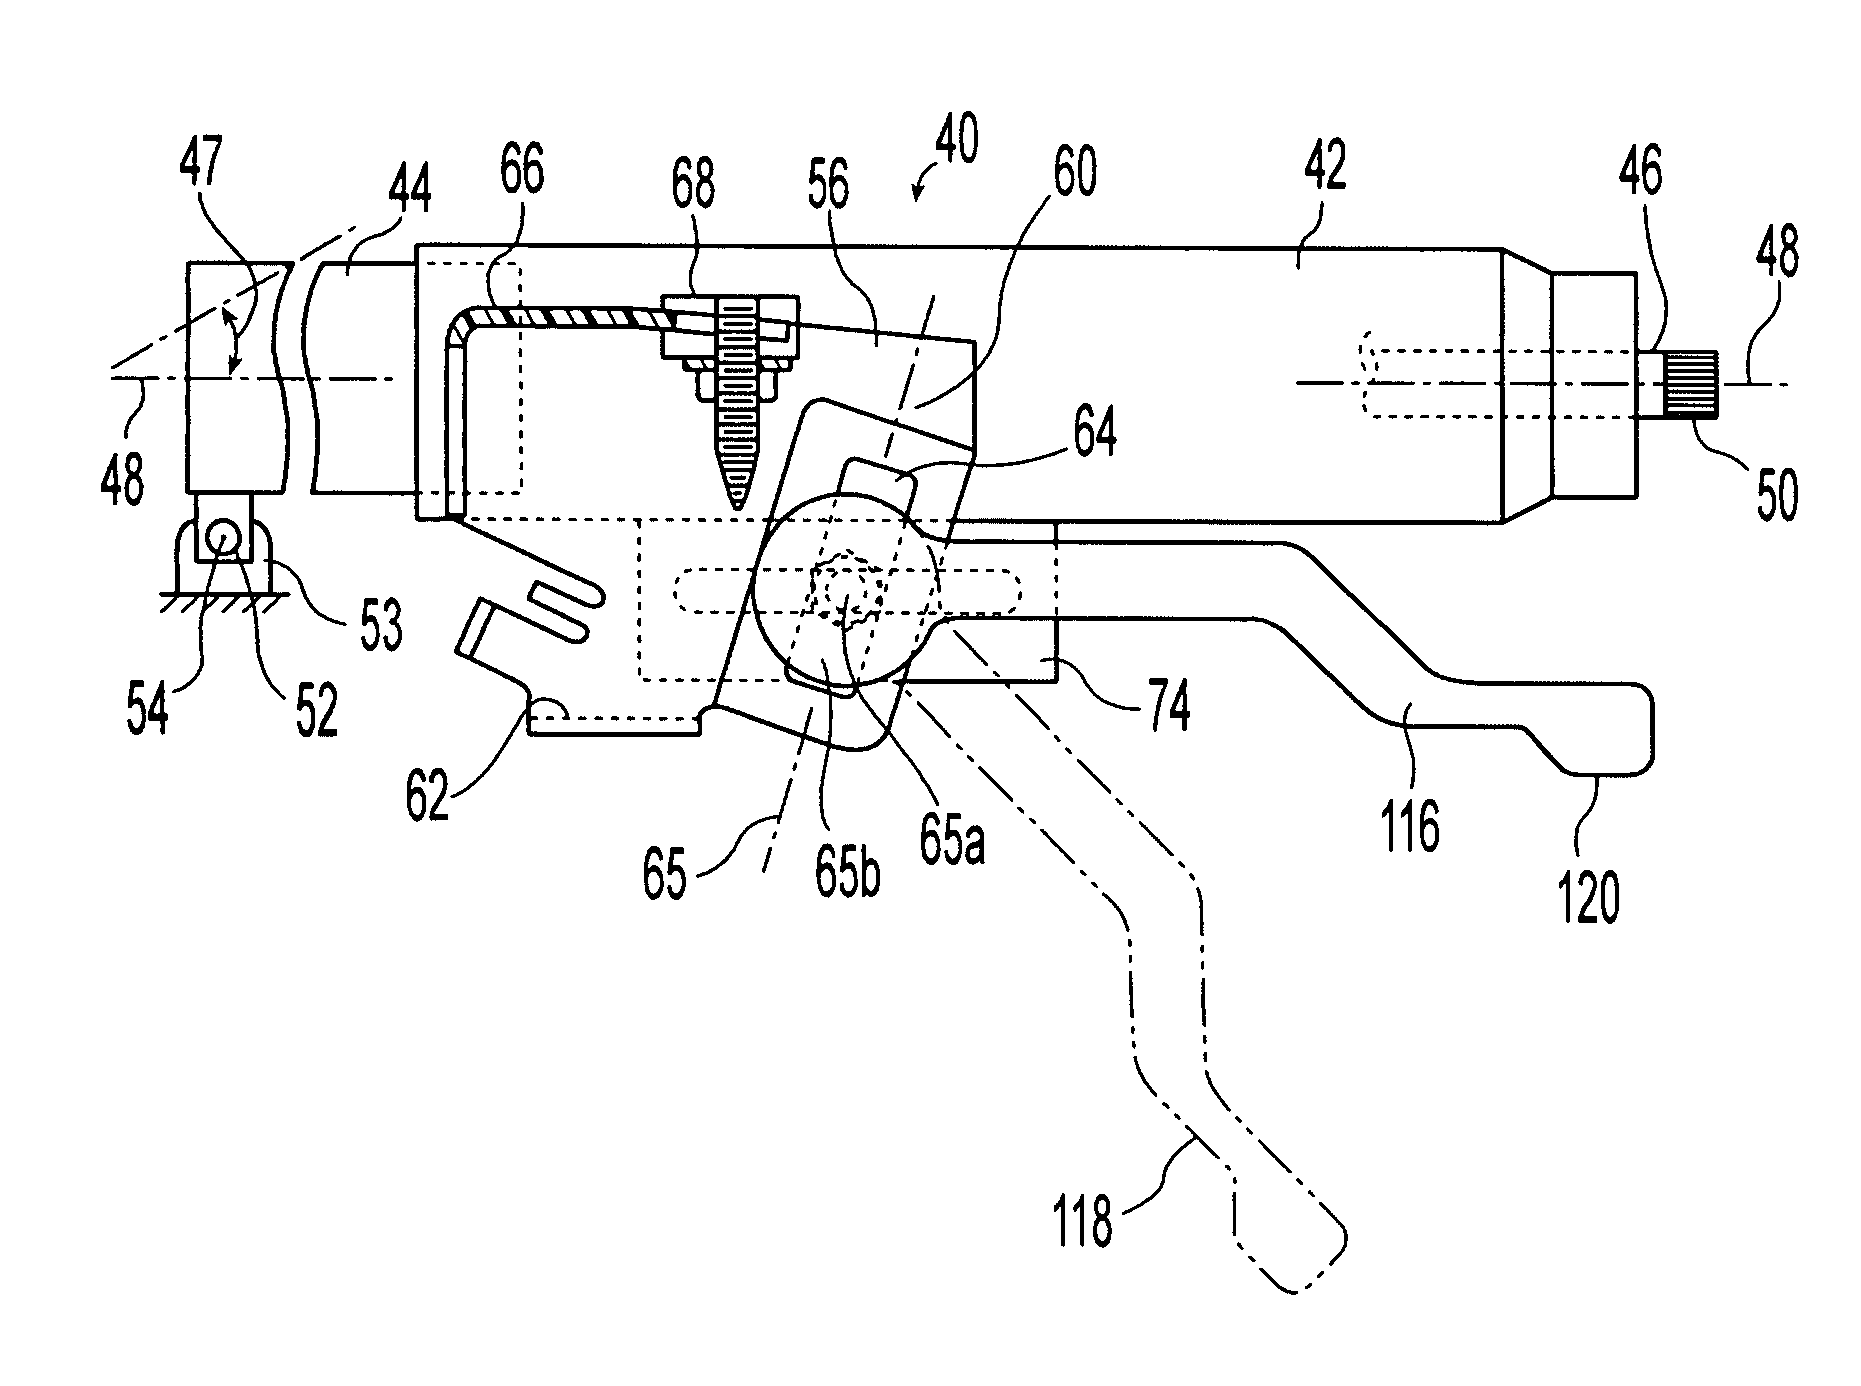 Adjustable steering column assembly with compressive locking mechanism